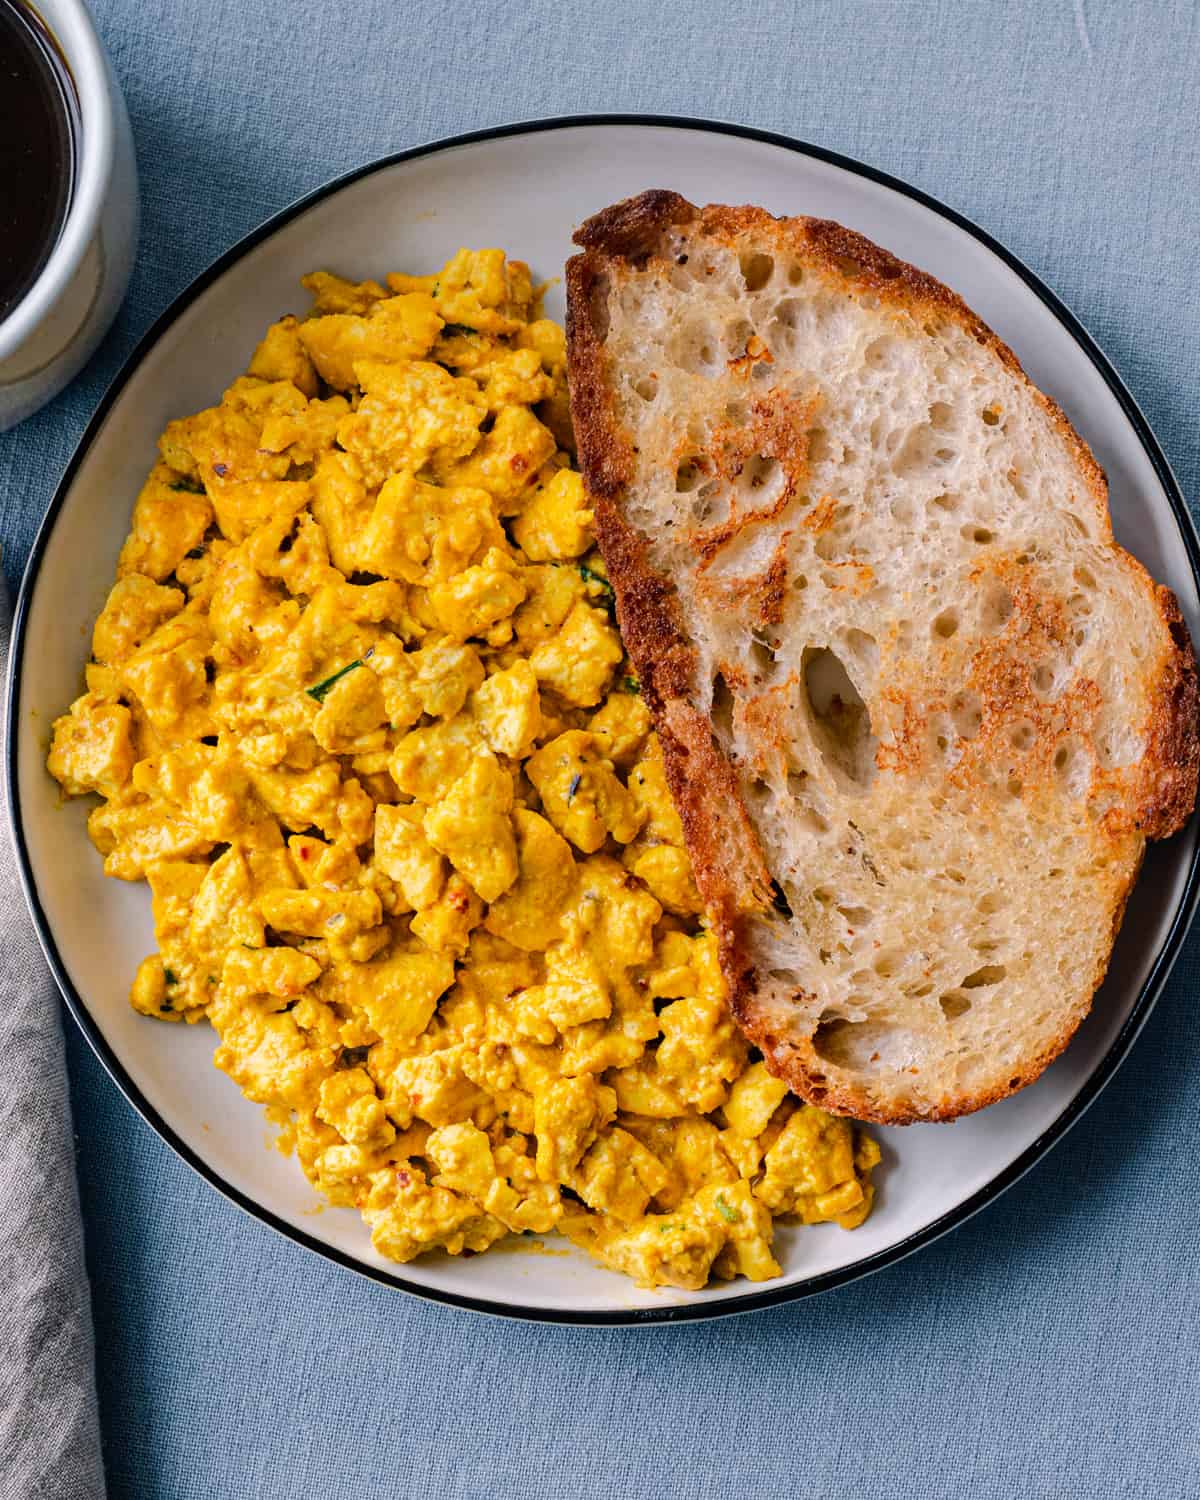 creamy tofu scramble piled high on a white plate with a large slice of toasted bread next to it on a blue tablecloth. 